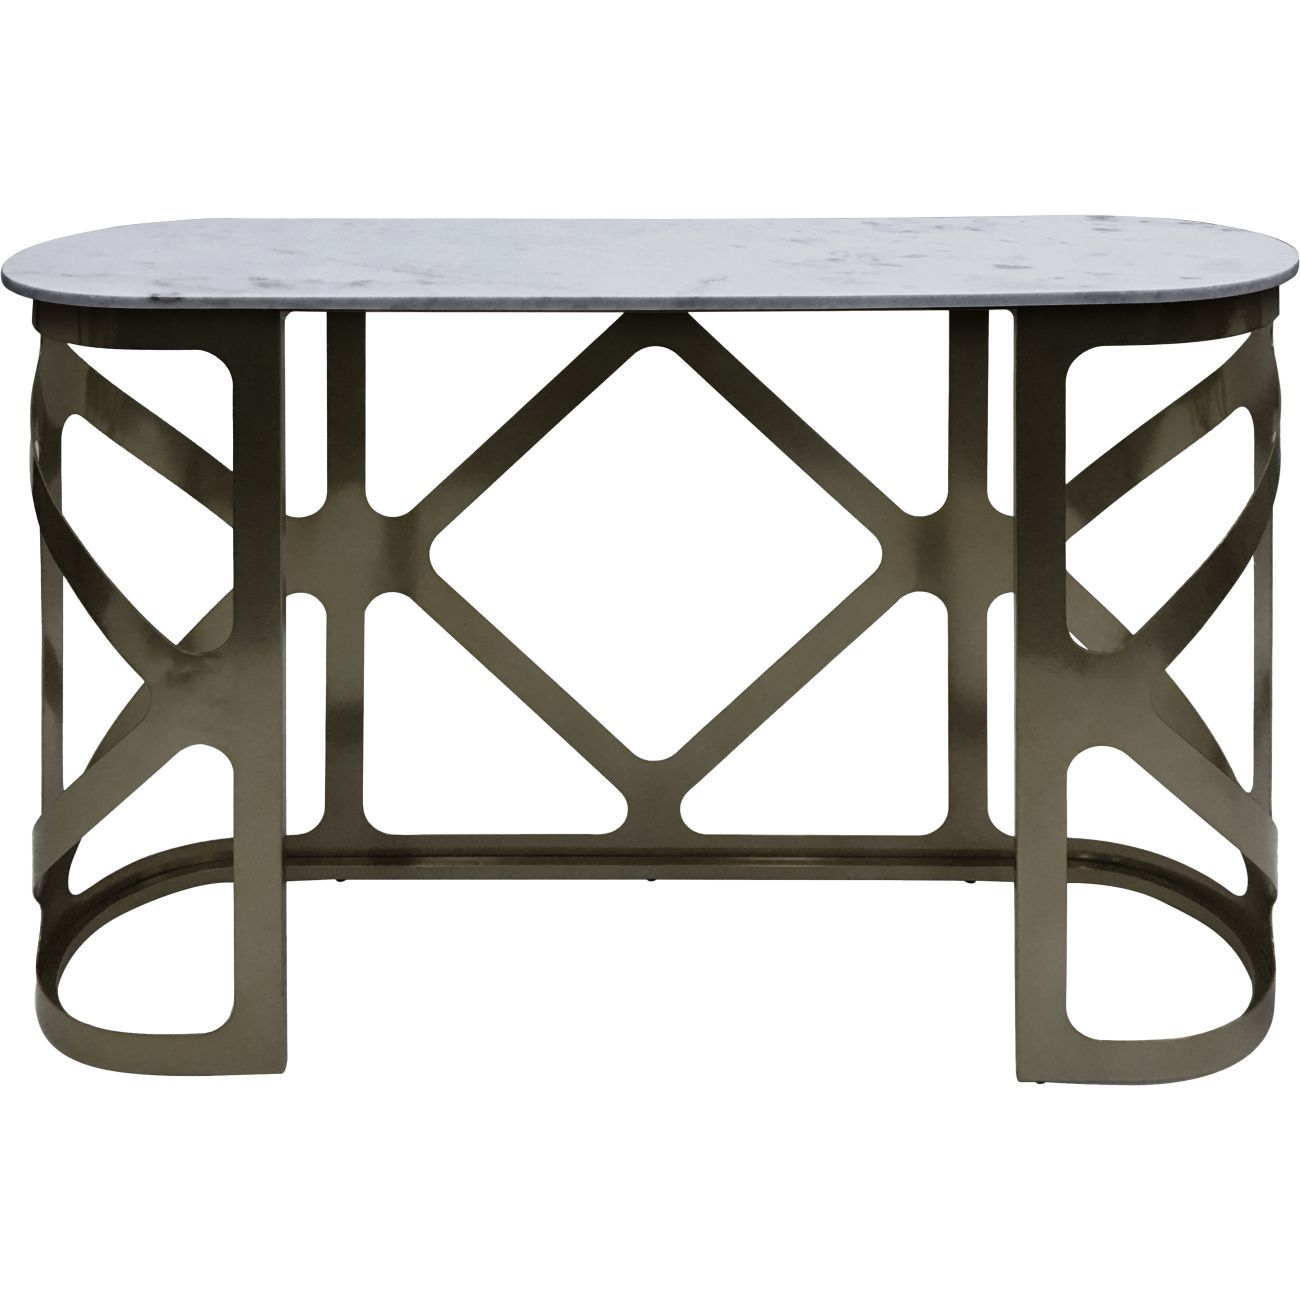 Metropolitan Console Table Metallic Black Nickel Finish Throughout Black Metal And Marble Console Tables (View 11 of 20)